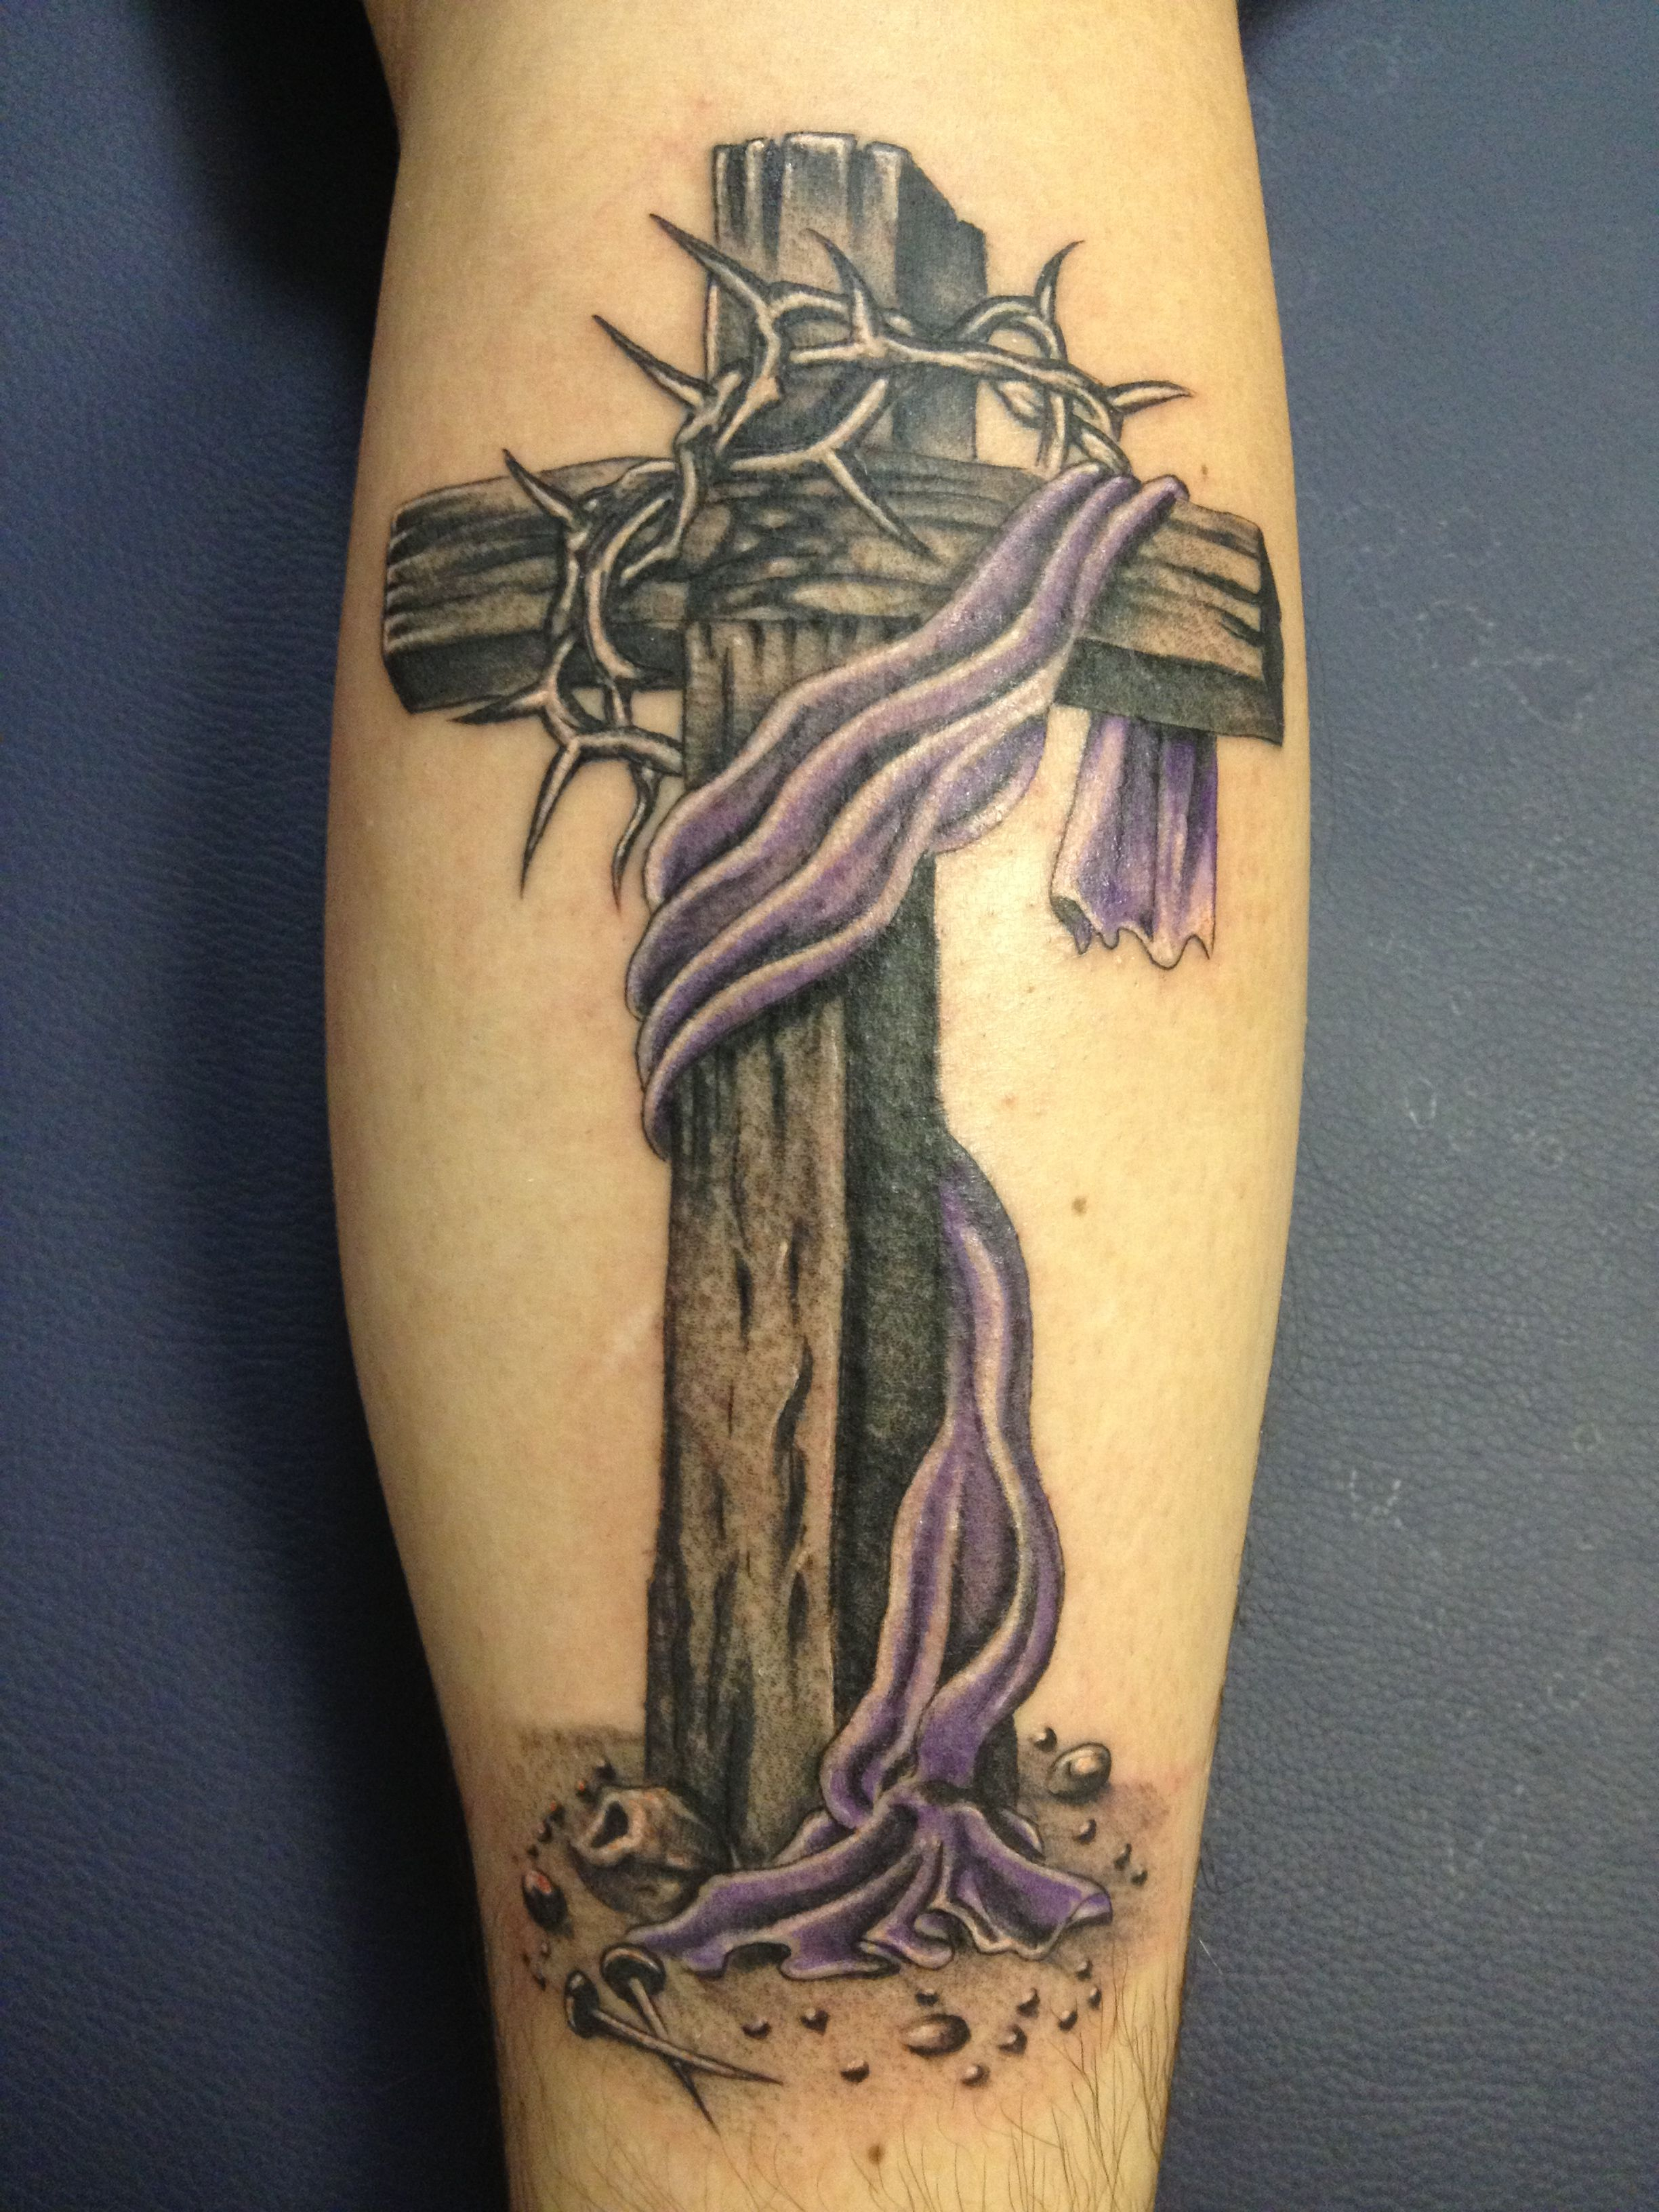 Ephesian Cross With Crown Of Thorns Tattoos Tattoos Body Art intended for size 2448 X 3264